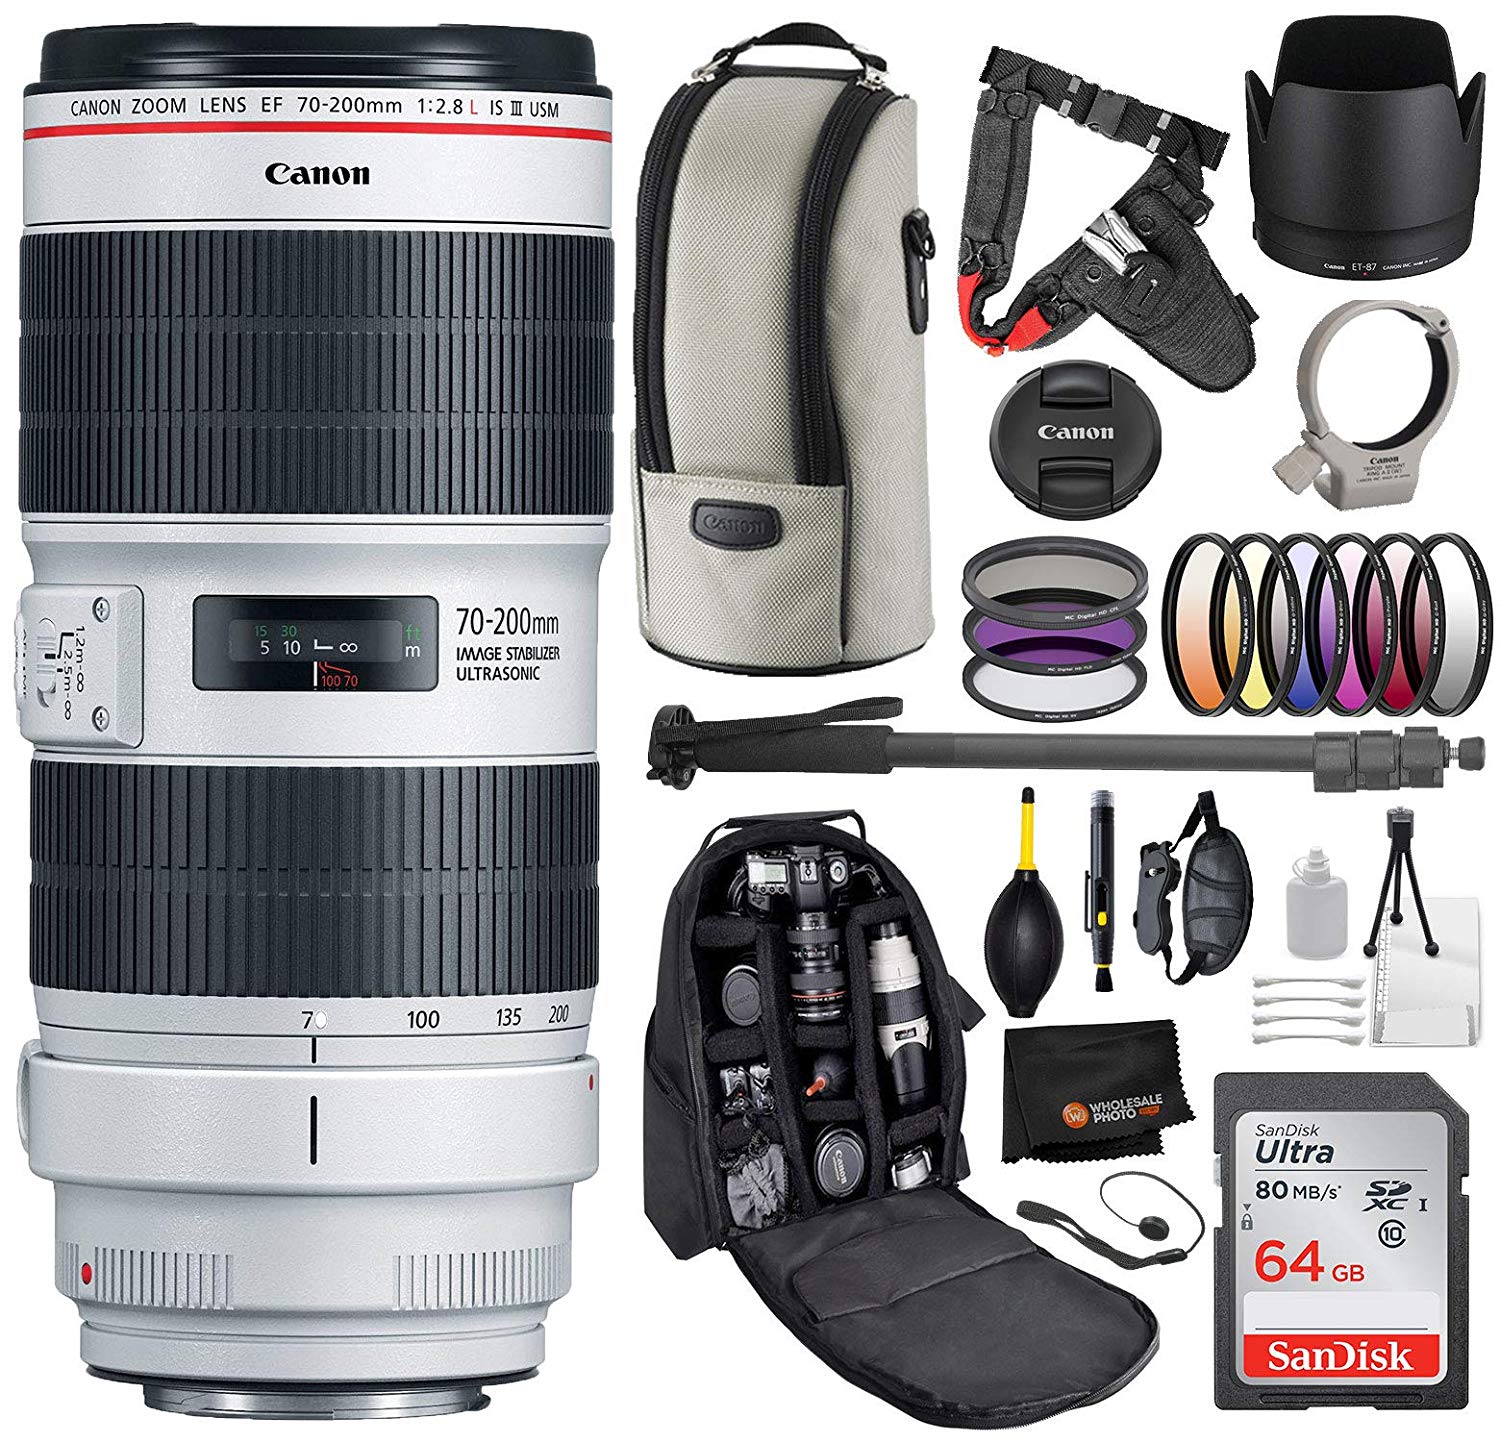 Canon EF 70-200mm f/2.8L IS III USM Lens with Professional Bundle Package Deal